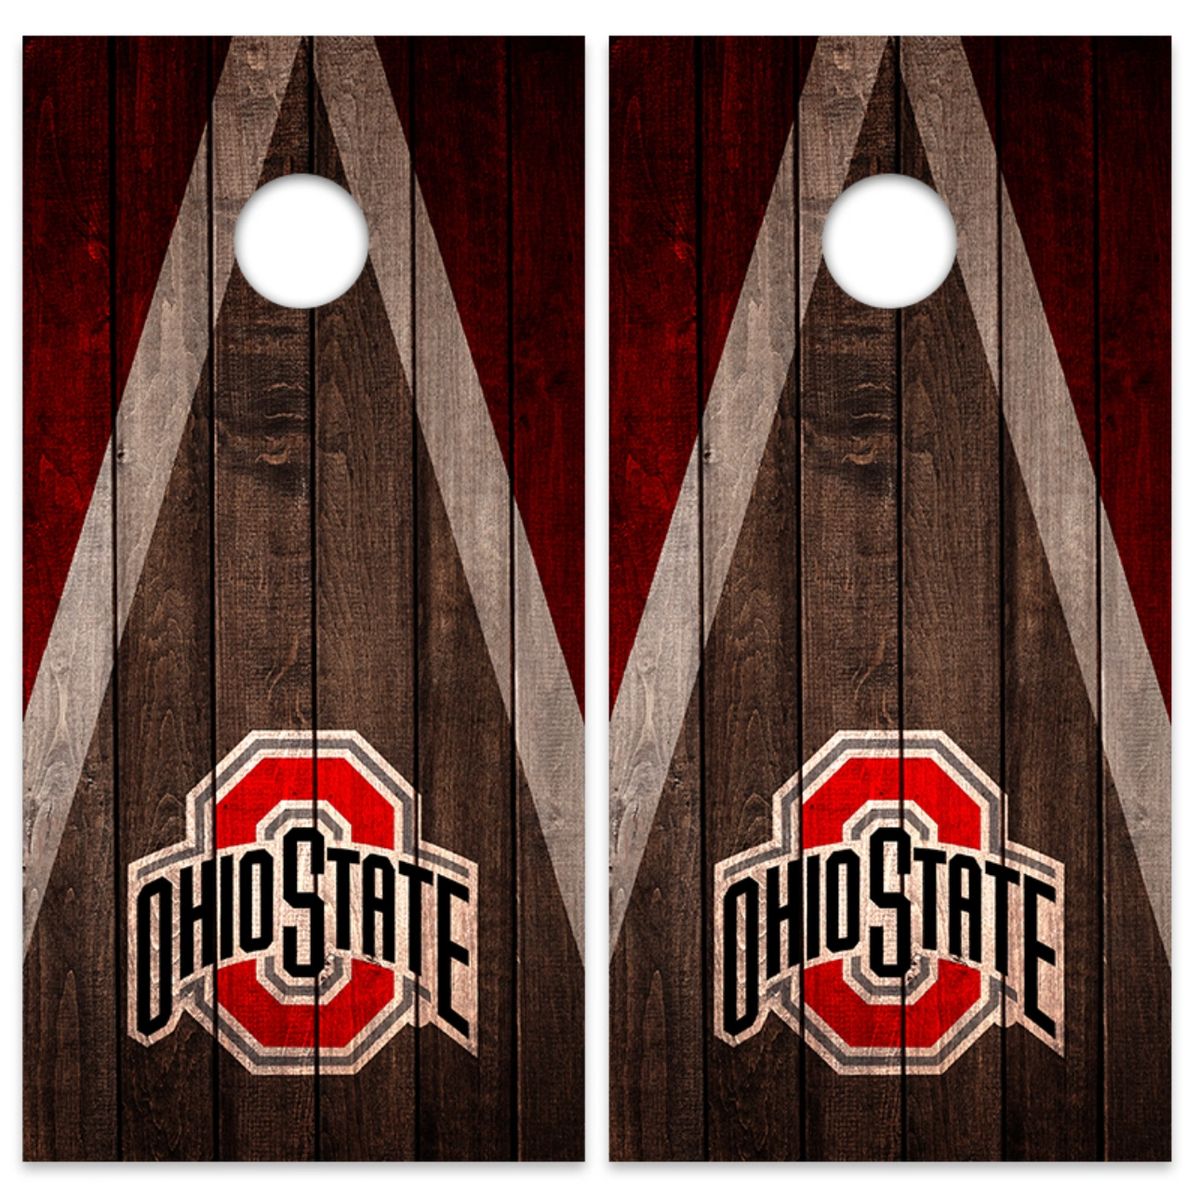 Ohio State Vinyl Wrapped Cornhole boards with bags